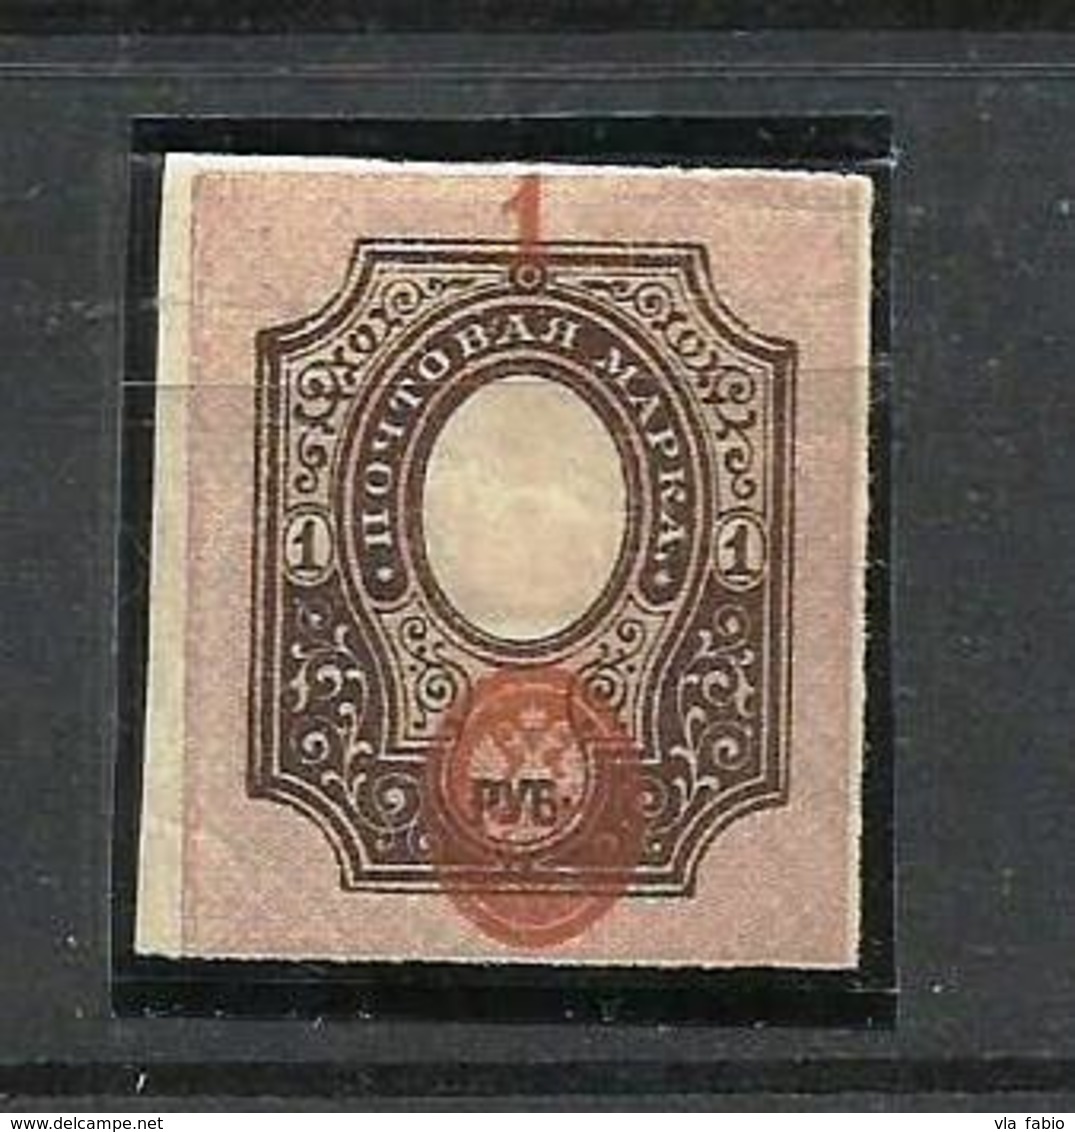 Russia 1908-1918 RUSIA RUSSIE RUSSLAND Unwmk PRINT DEFECT DISPLACED CENTER W/ Perf Vert Vanish On Face MLN - Errors & Oddities